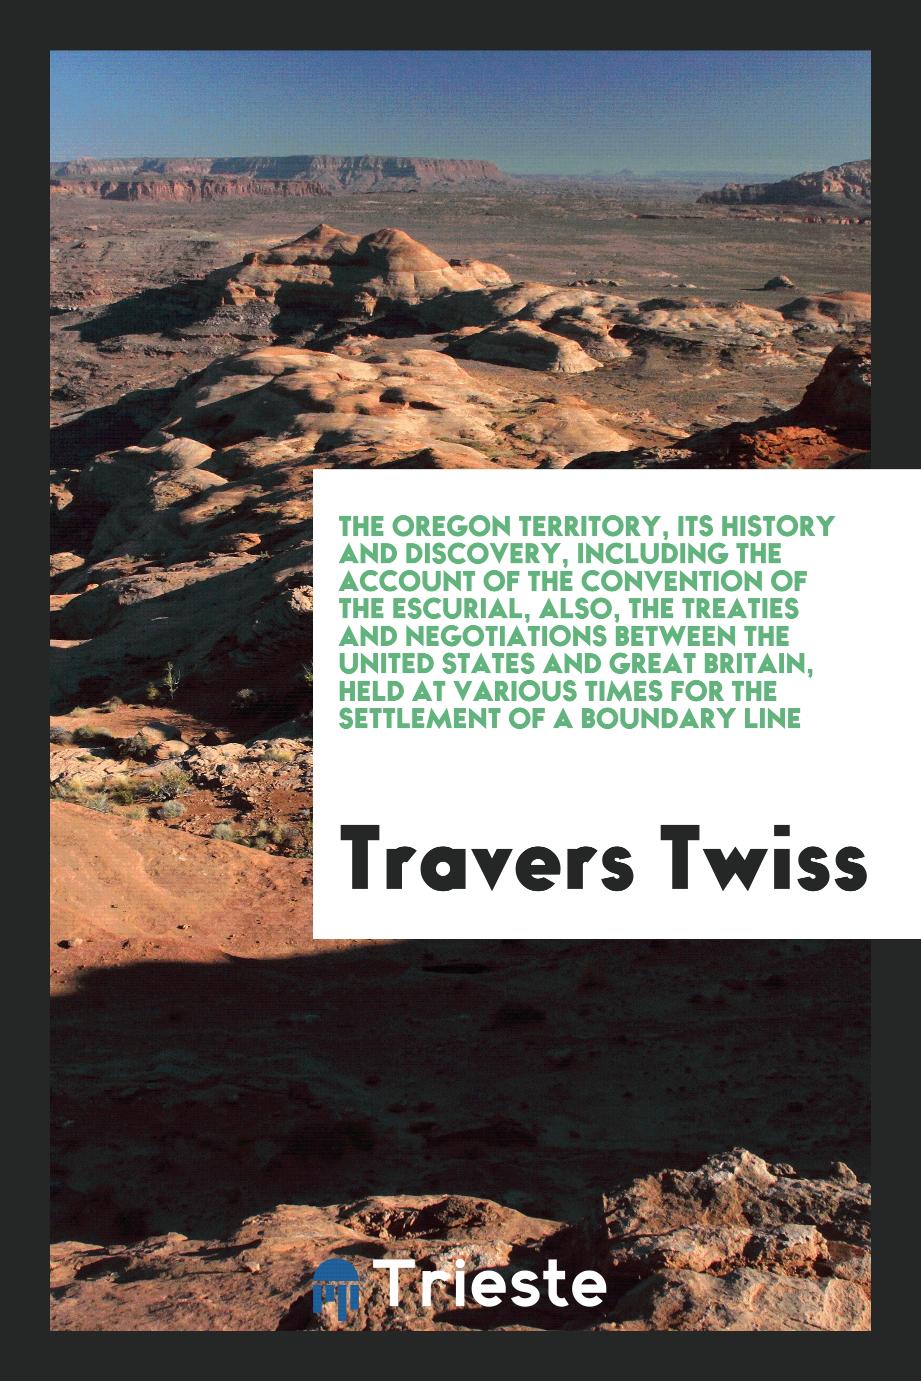 The Oregon Territory, Its History and Discovery, Including the Account of the Convention of the Escurial, Also, the Treaties and Negotiations Between the United States and Great Britain, Held at Various Times for the Settlement of a Boundary Line